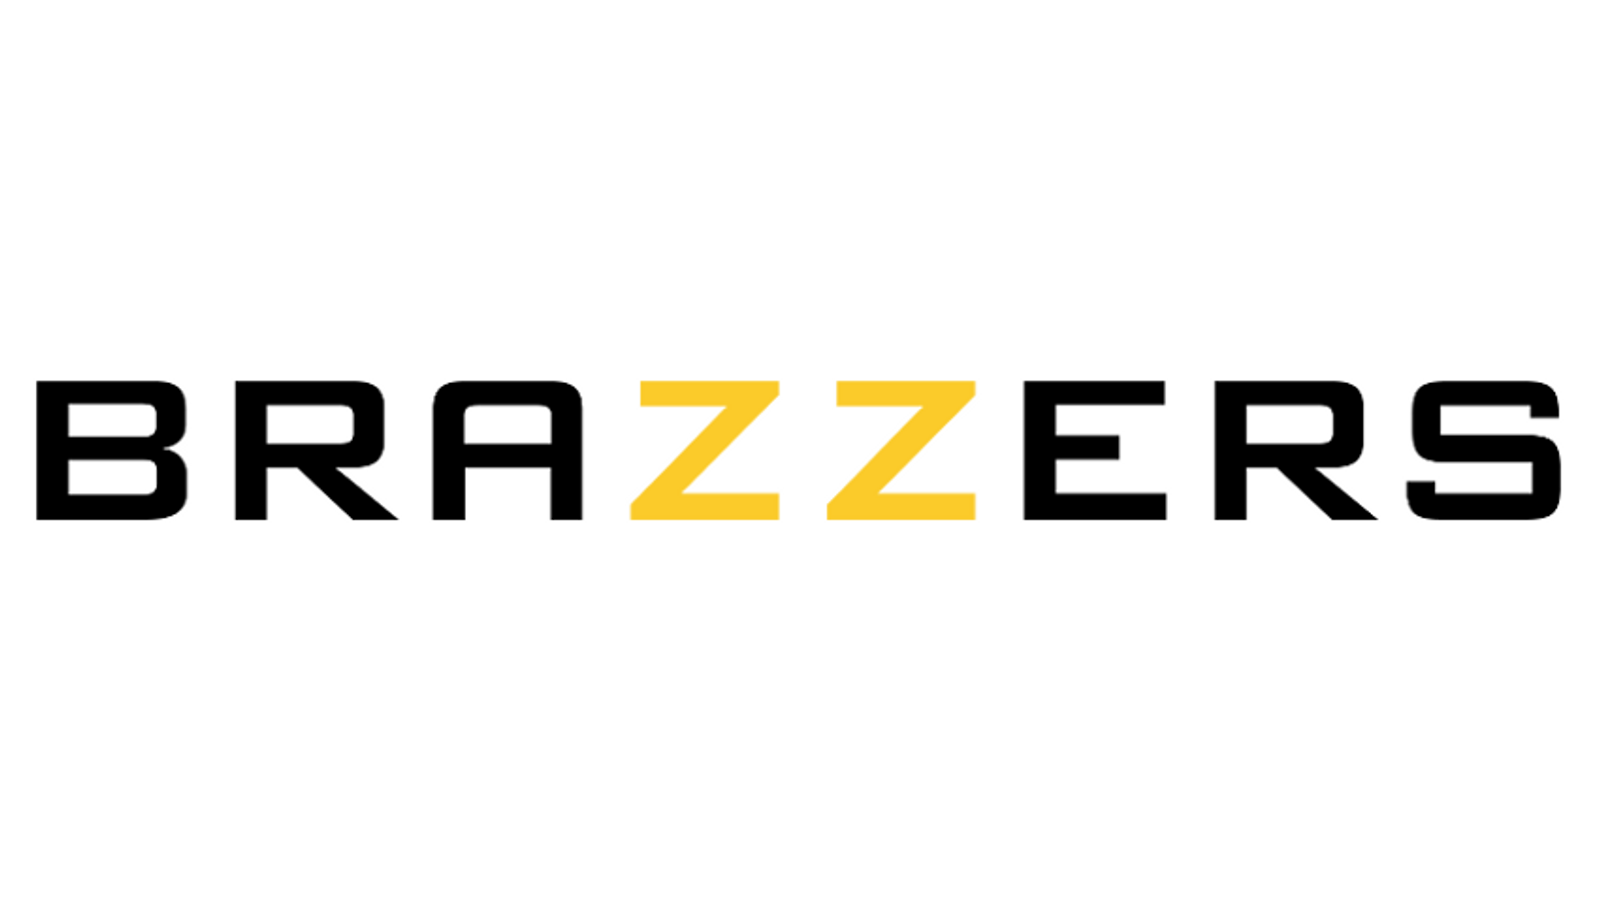 Brazzers Pledges Support to Collaborators During Production Hold